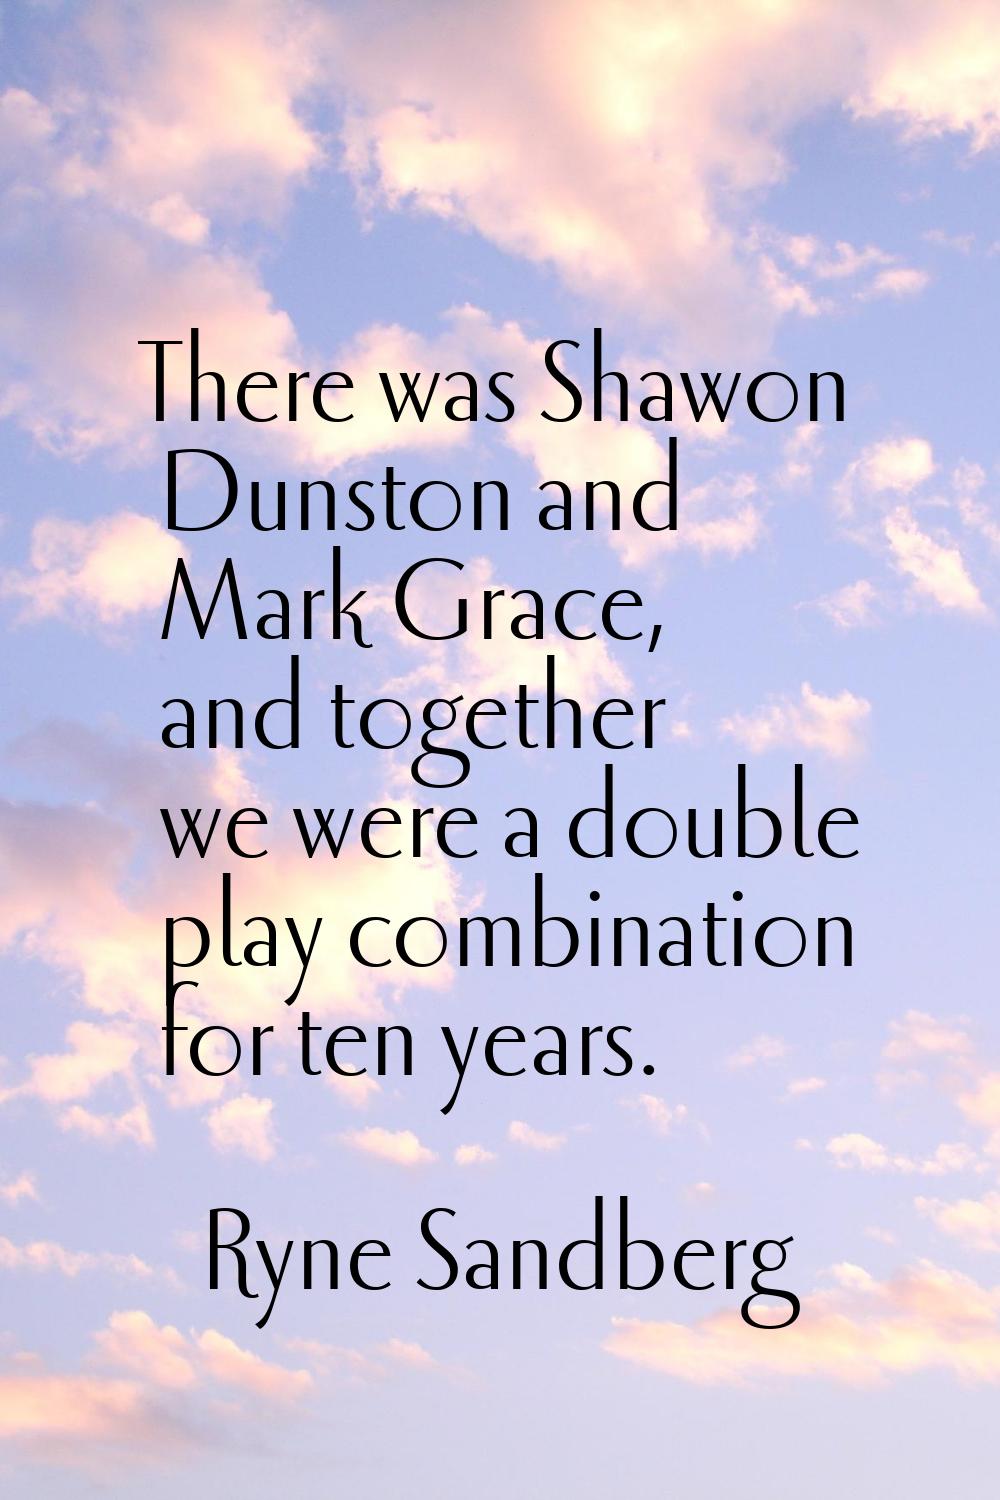 There was Shawon Dunston and Mark Grace, and together we were a double play combination for ten yea